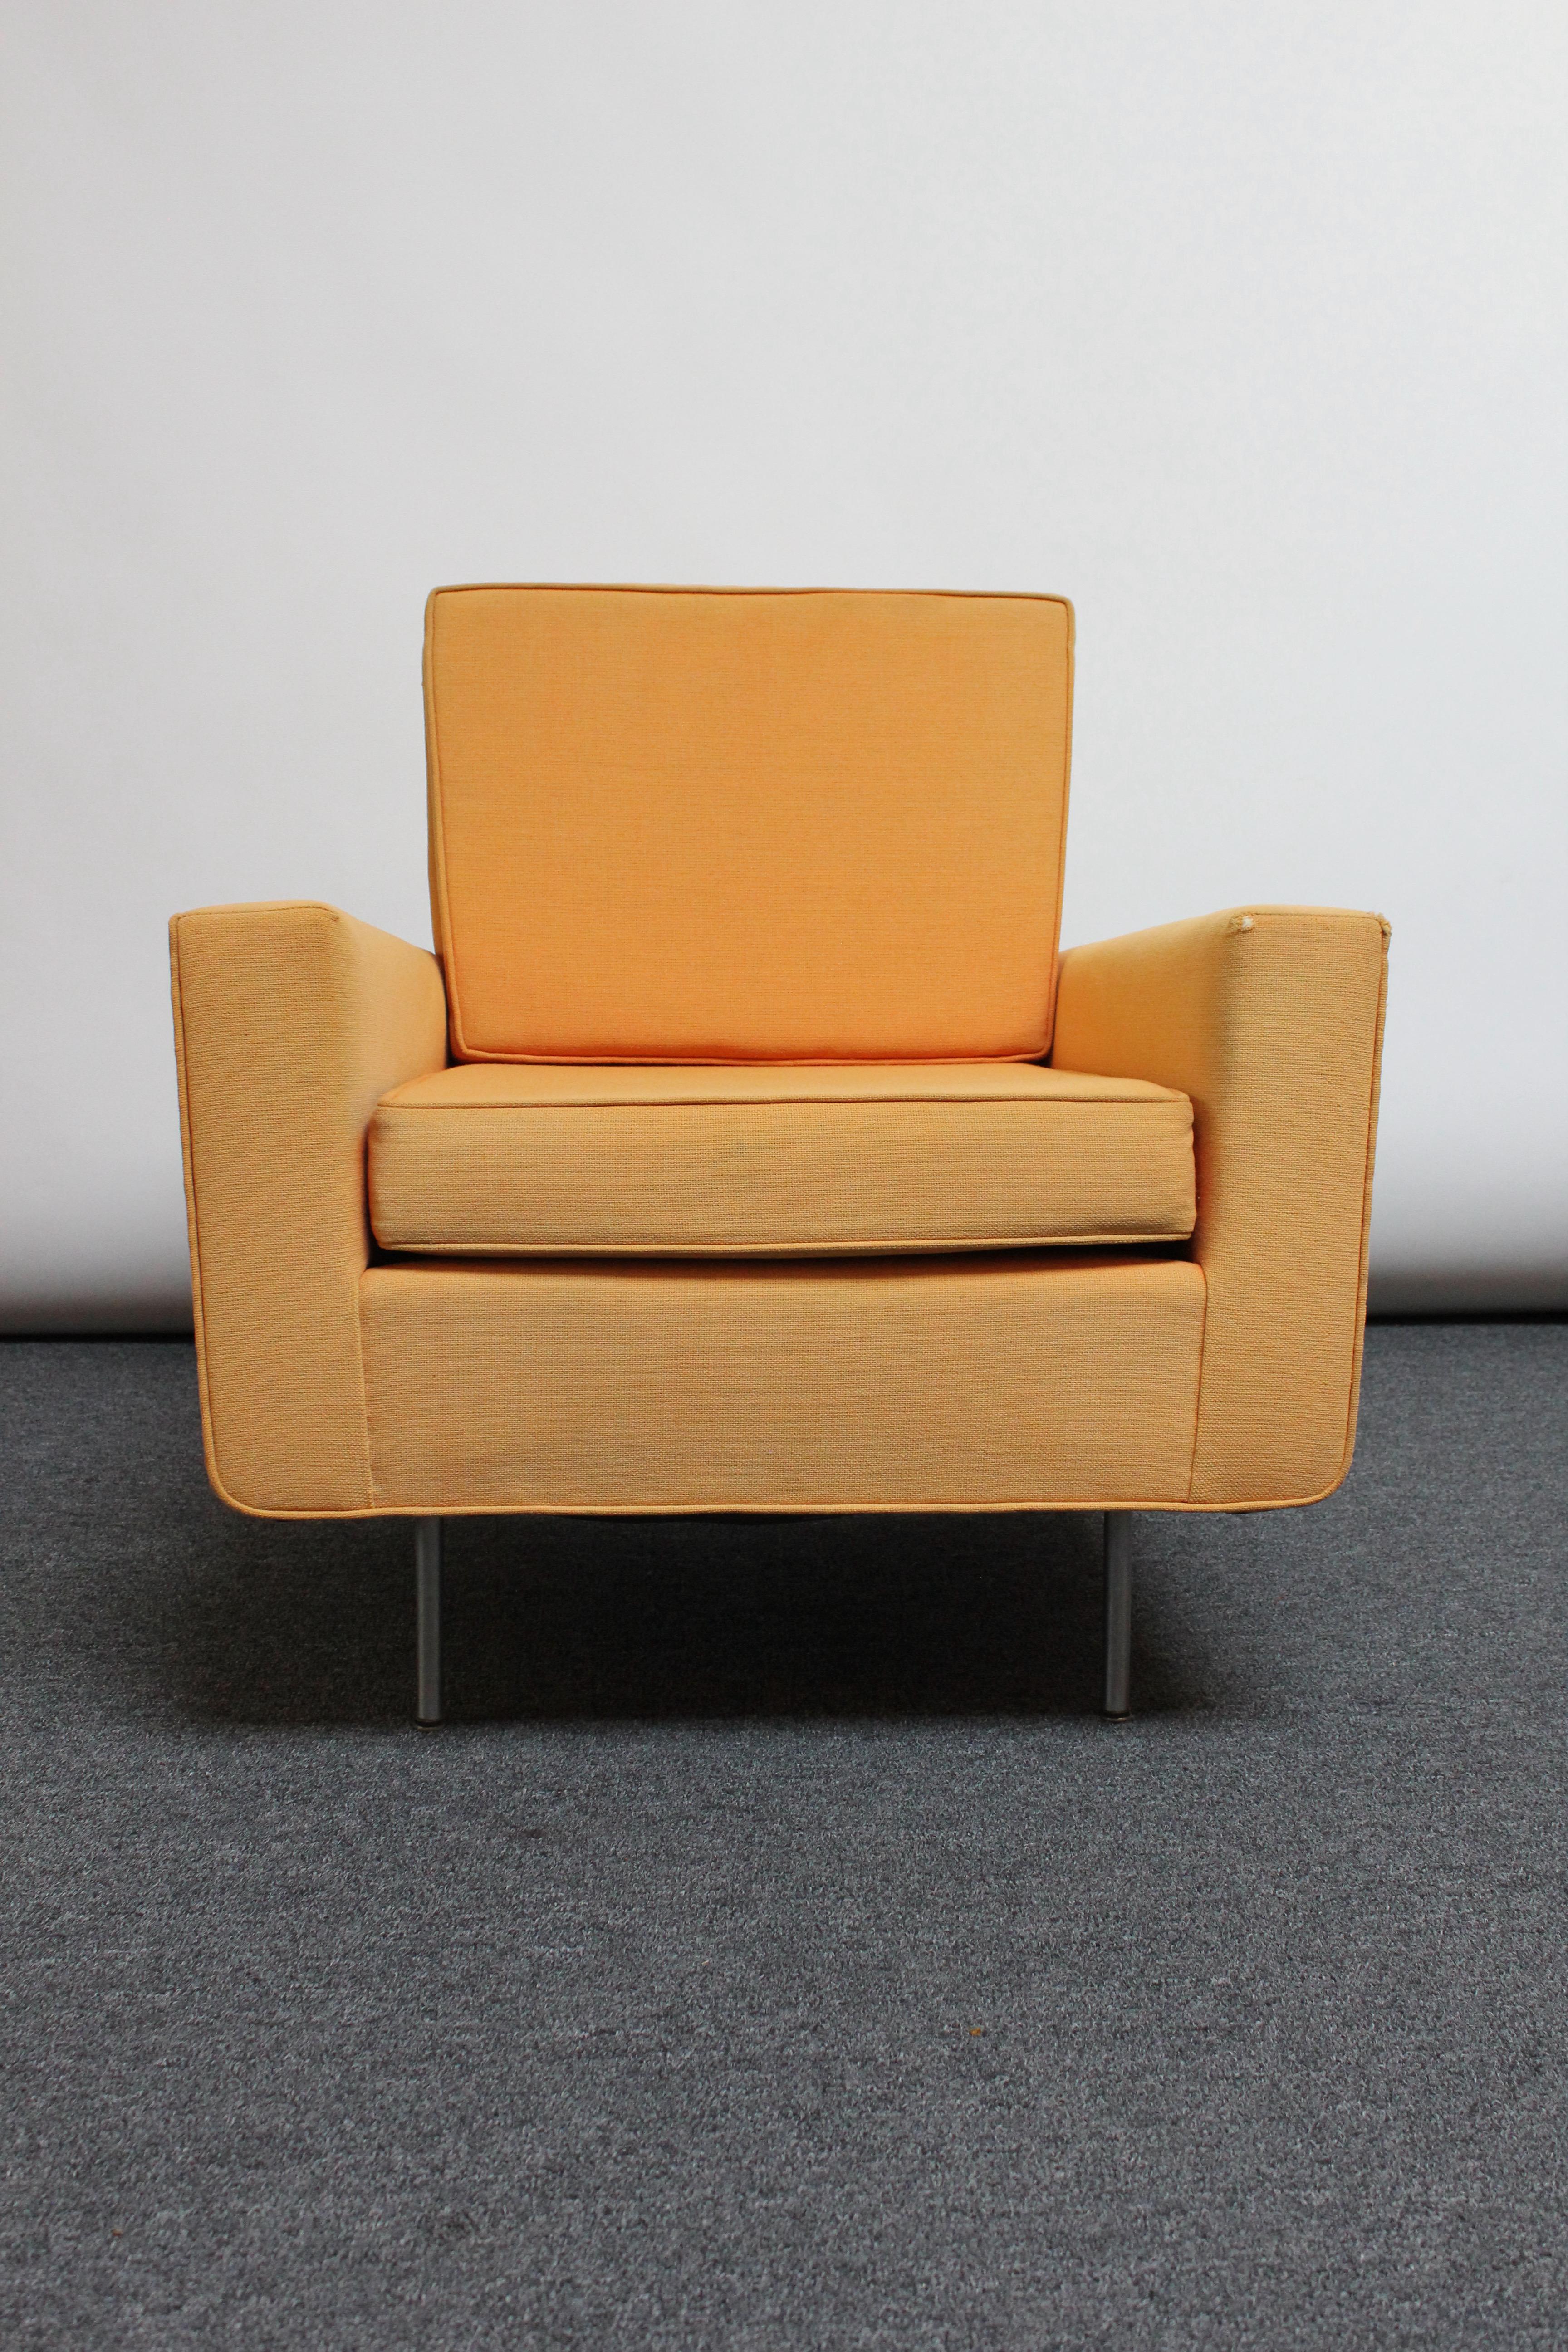 Florence Knoll Lounge Chair with Original Wool Upholstery In Fair Condition For Sale In Brooklyn, NY